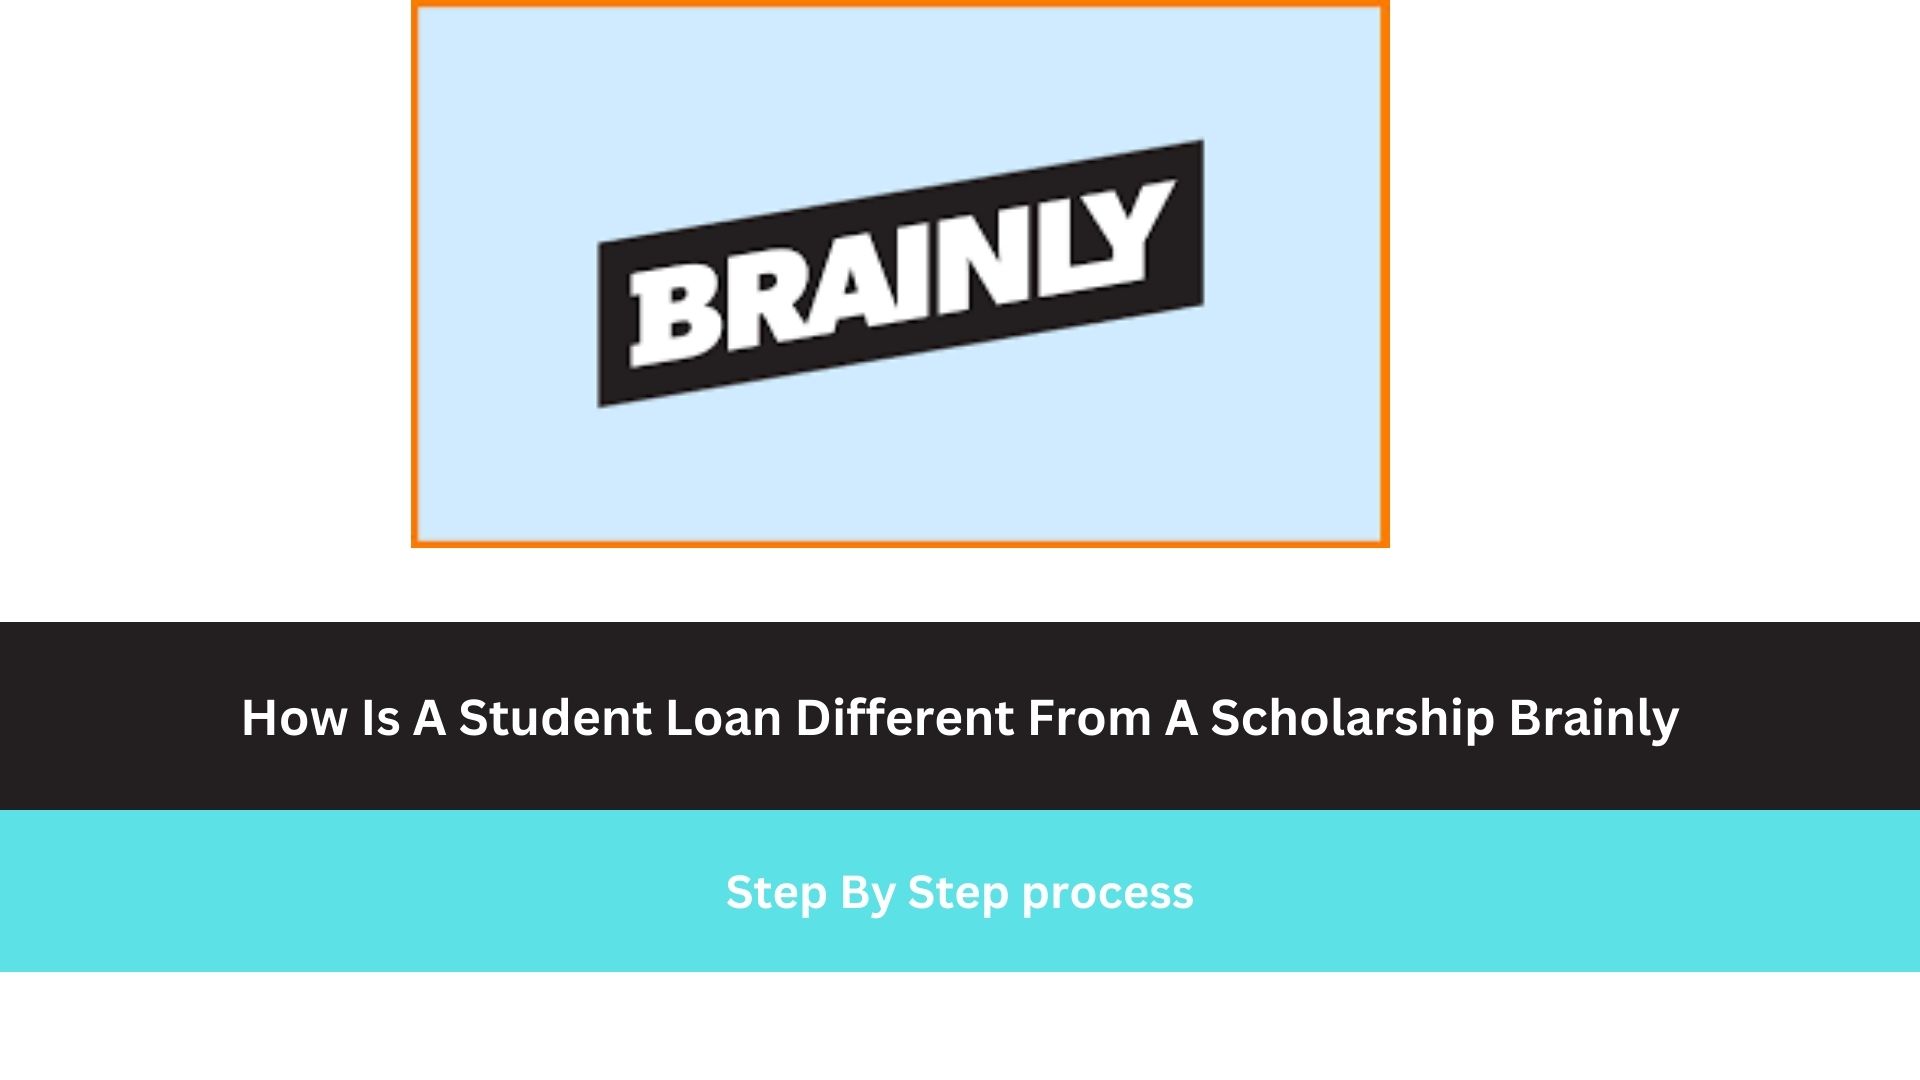 How Is A Student Loan Different From A Scholarship Brainly